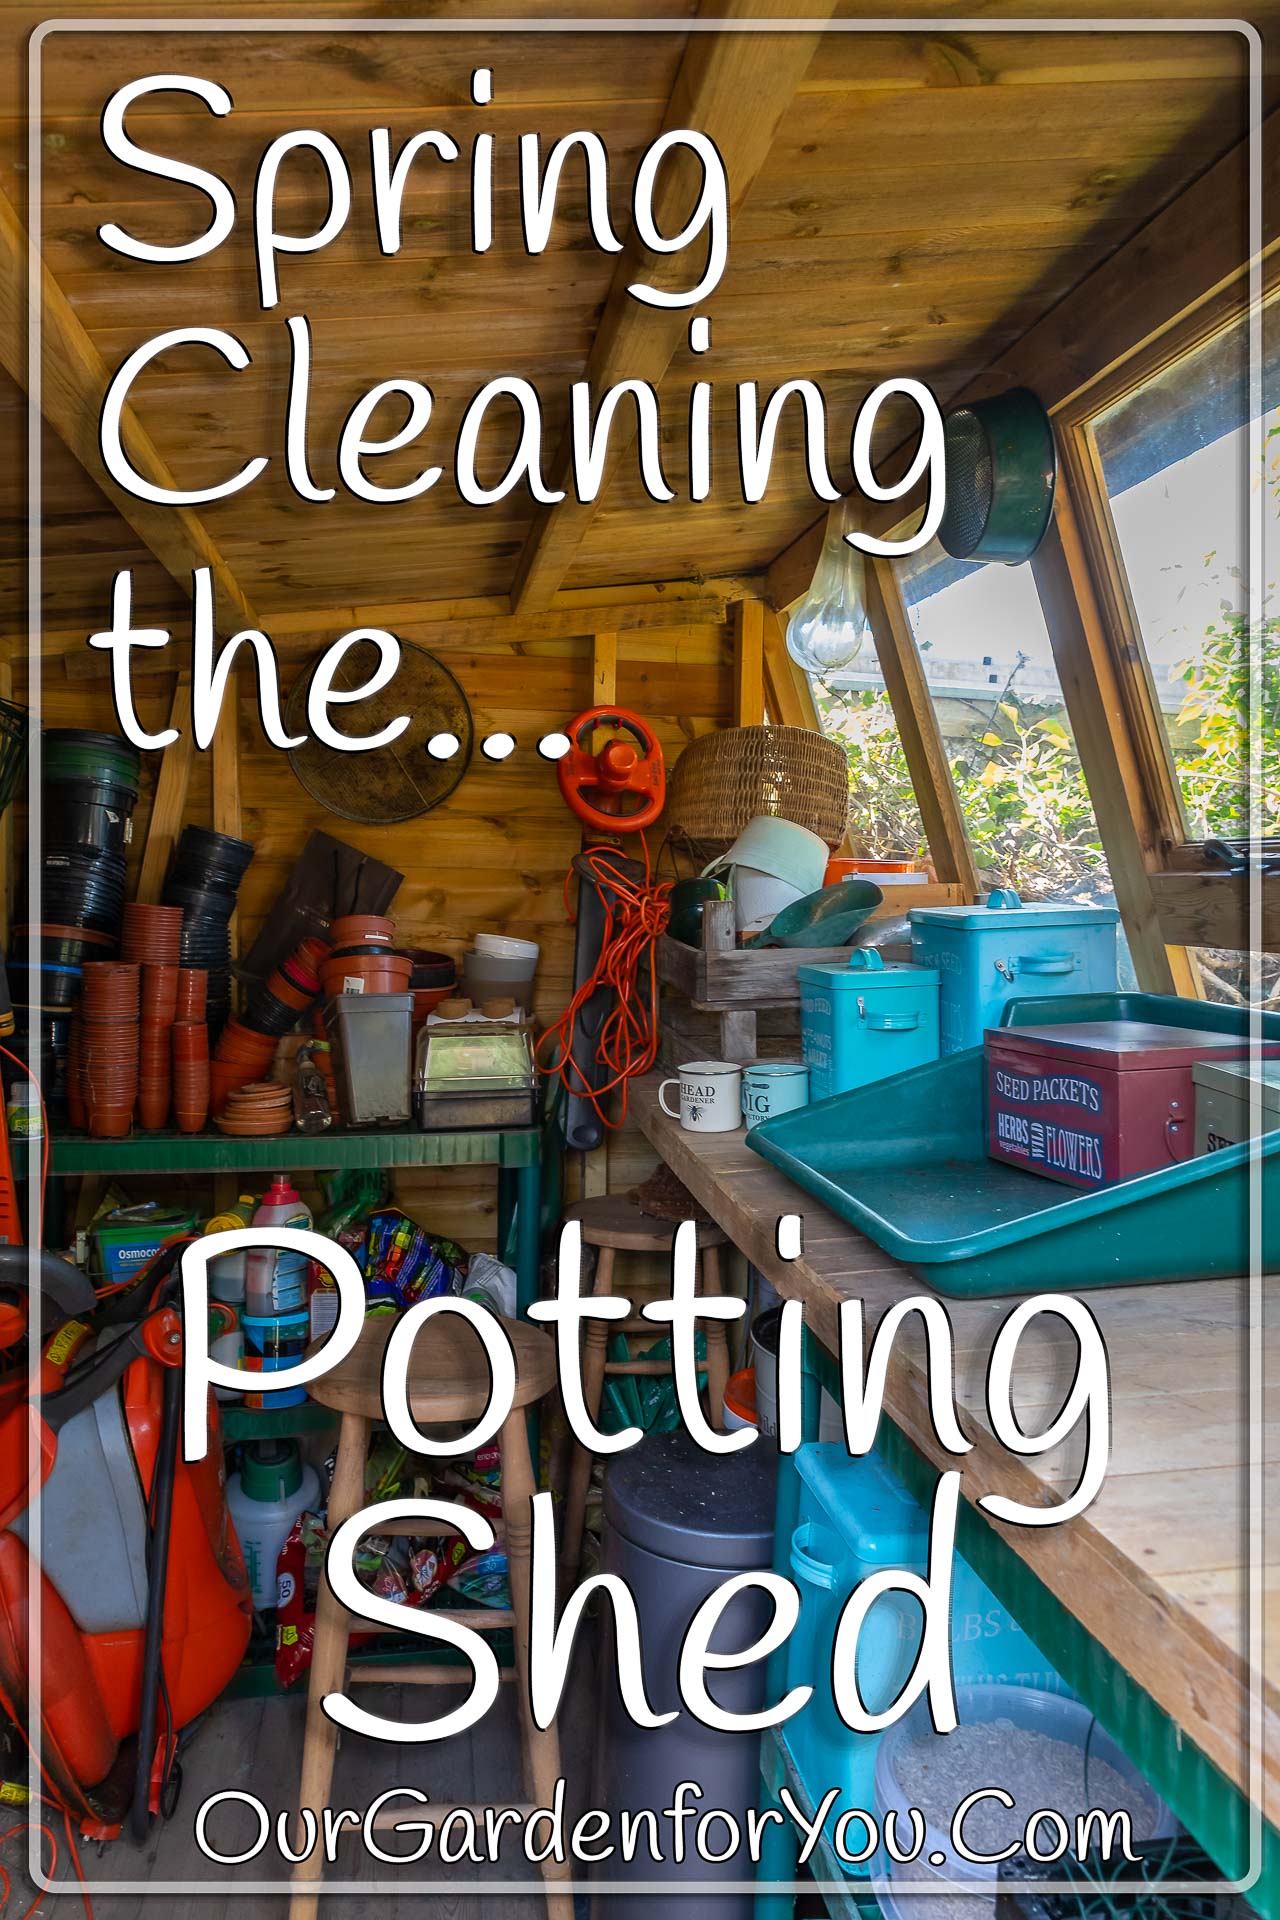 The Pin Image for our post = 'Spring cleaning the potting shed